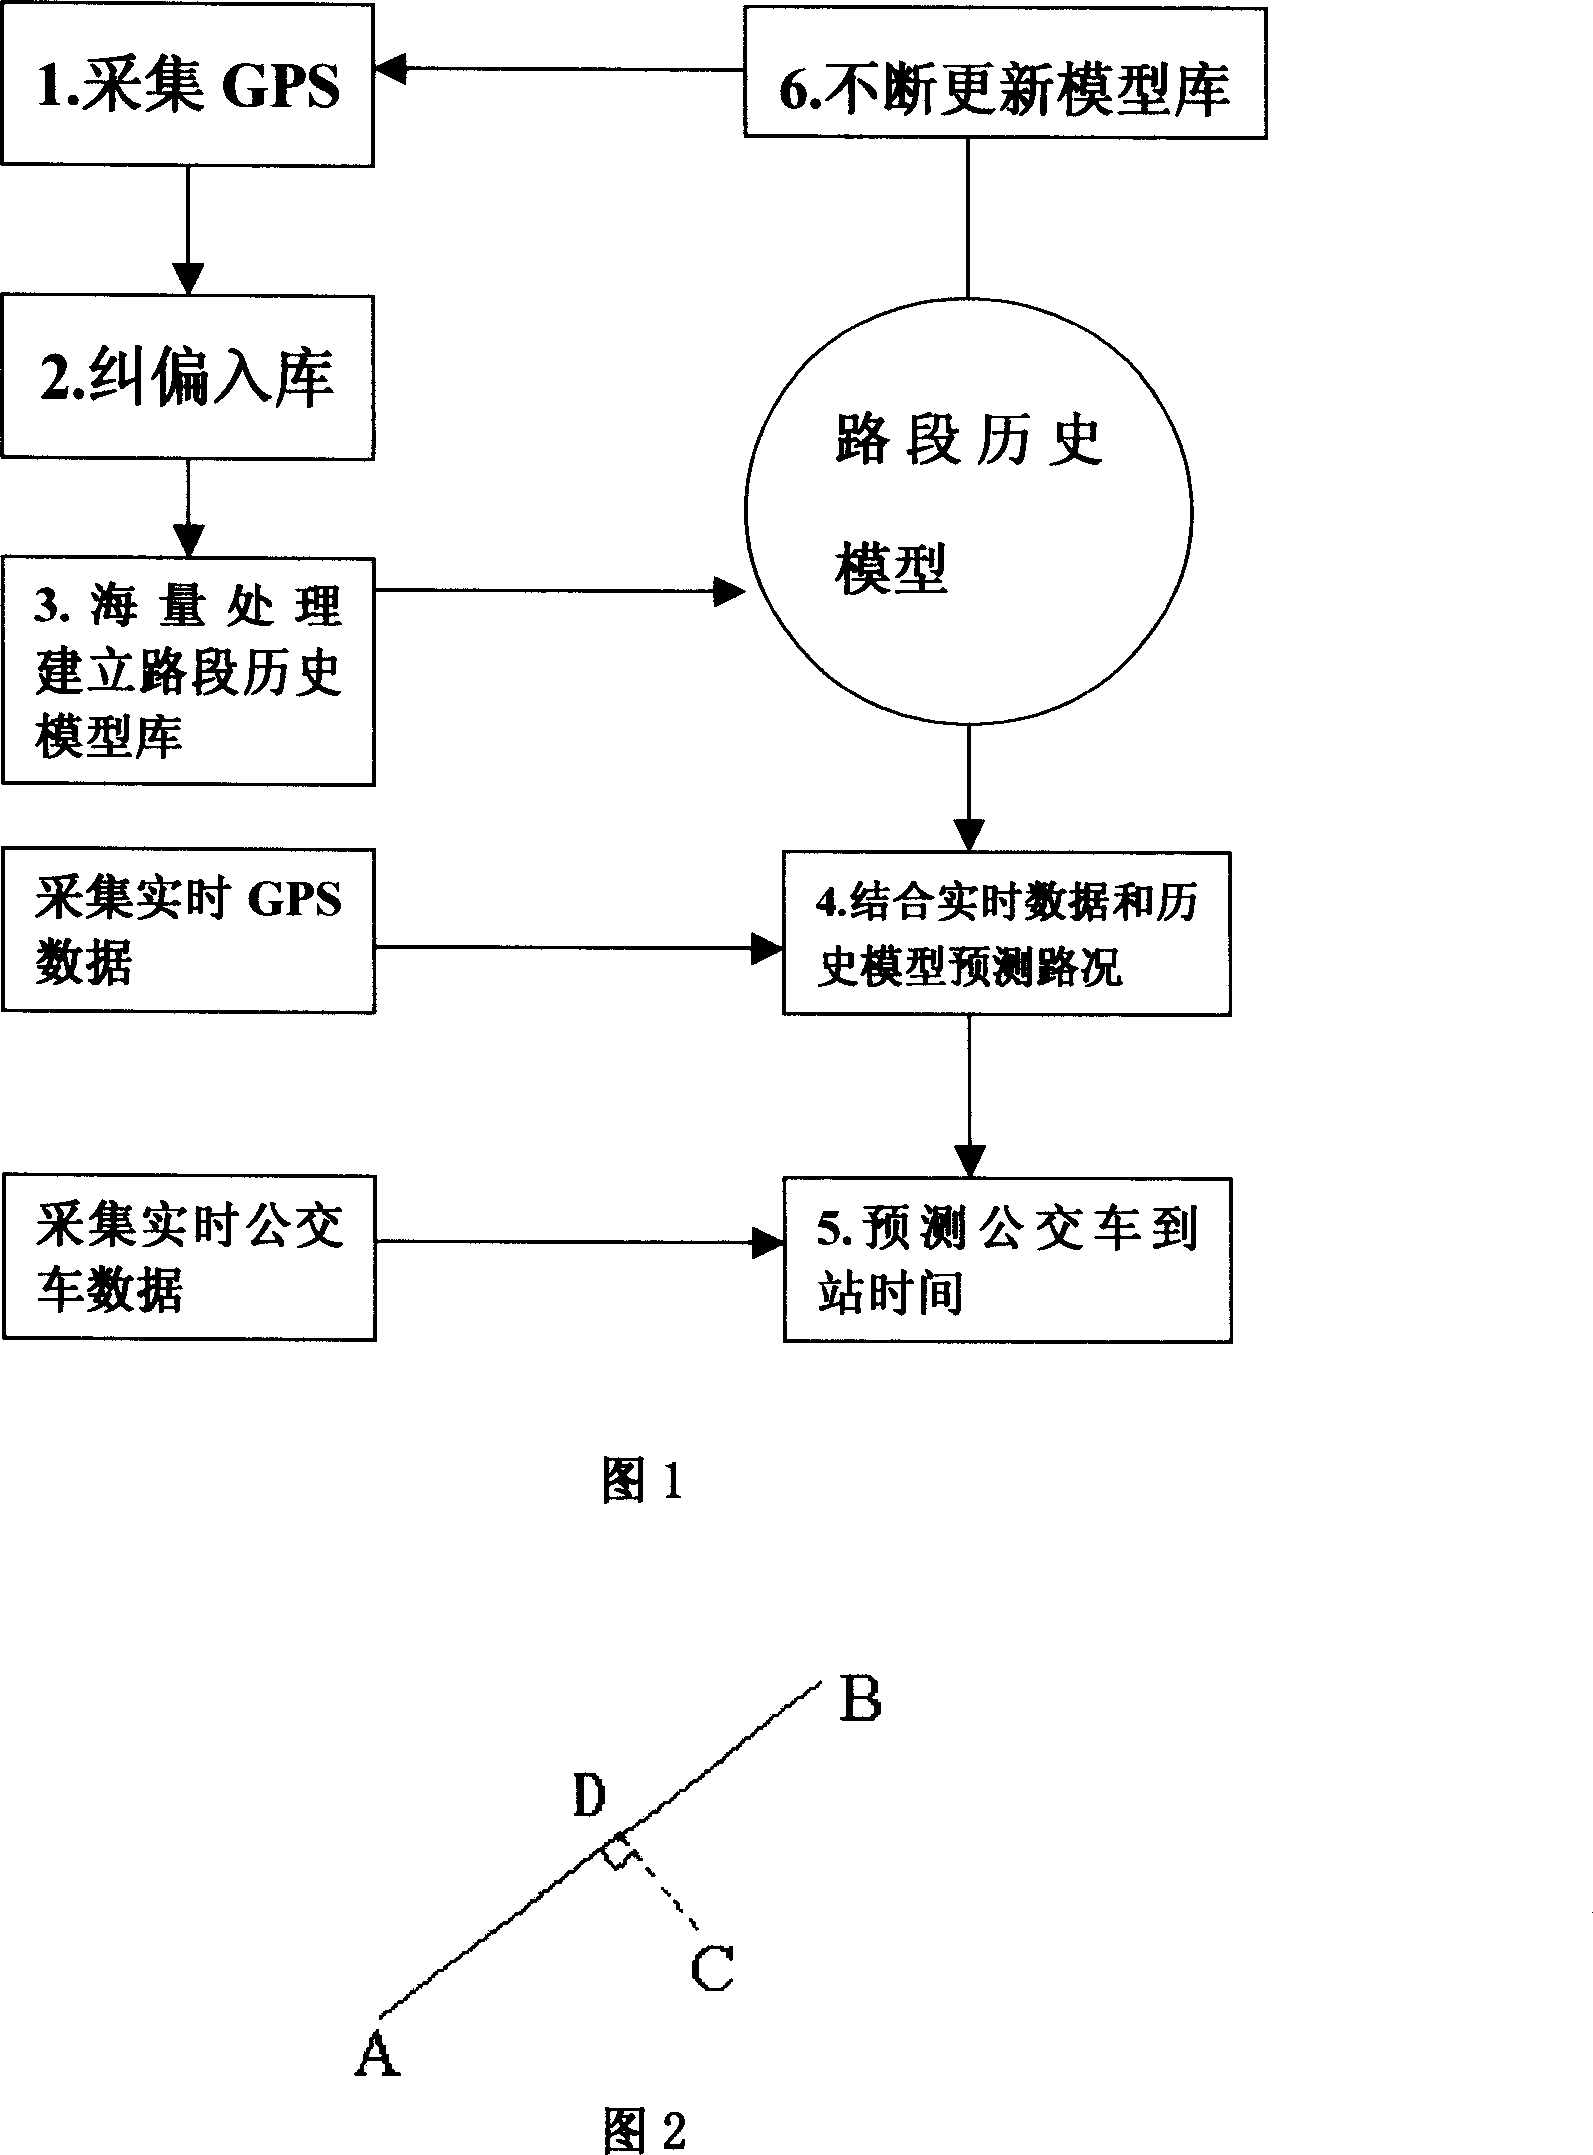 Method for forecasting reaching station of bus